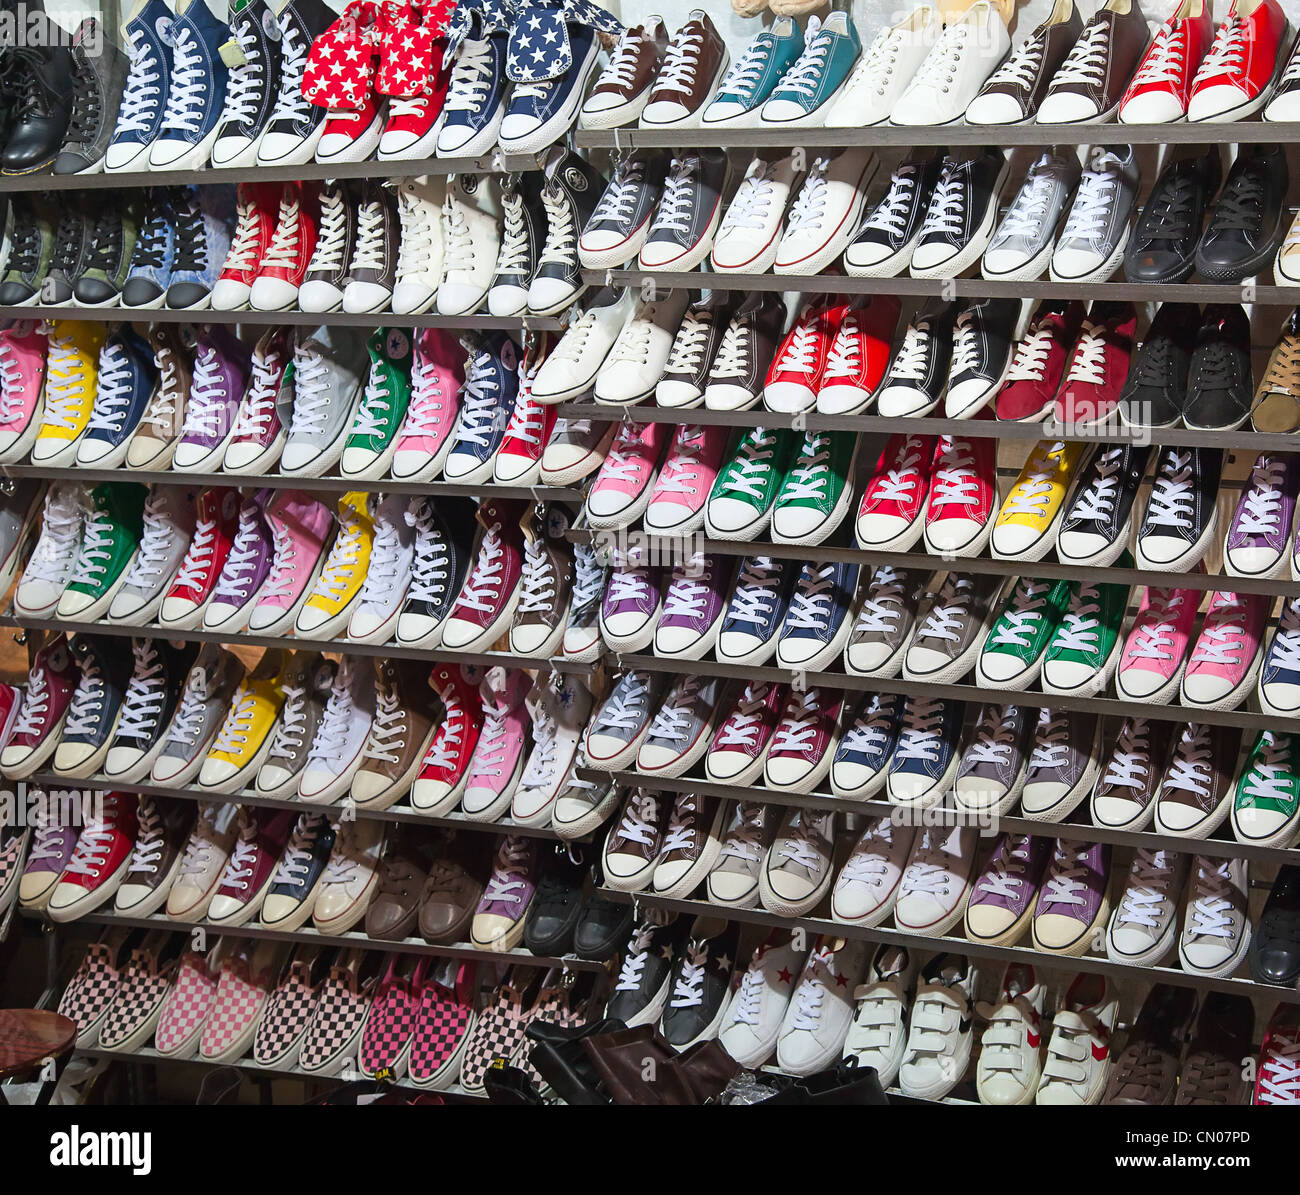 lots of sneaker shoes on sale Stock Photo - Alamy